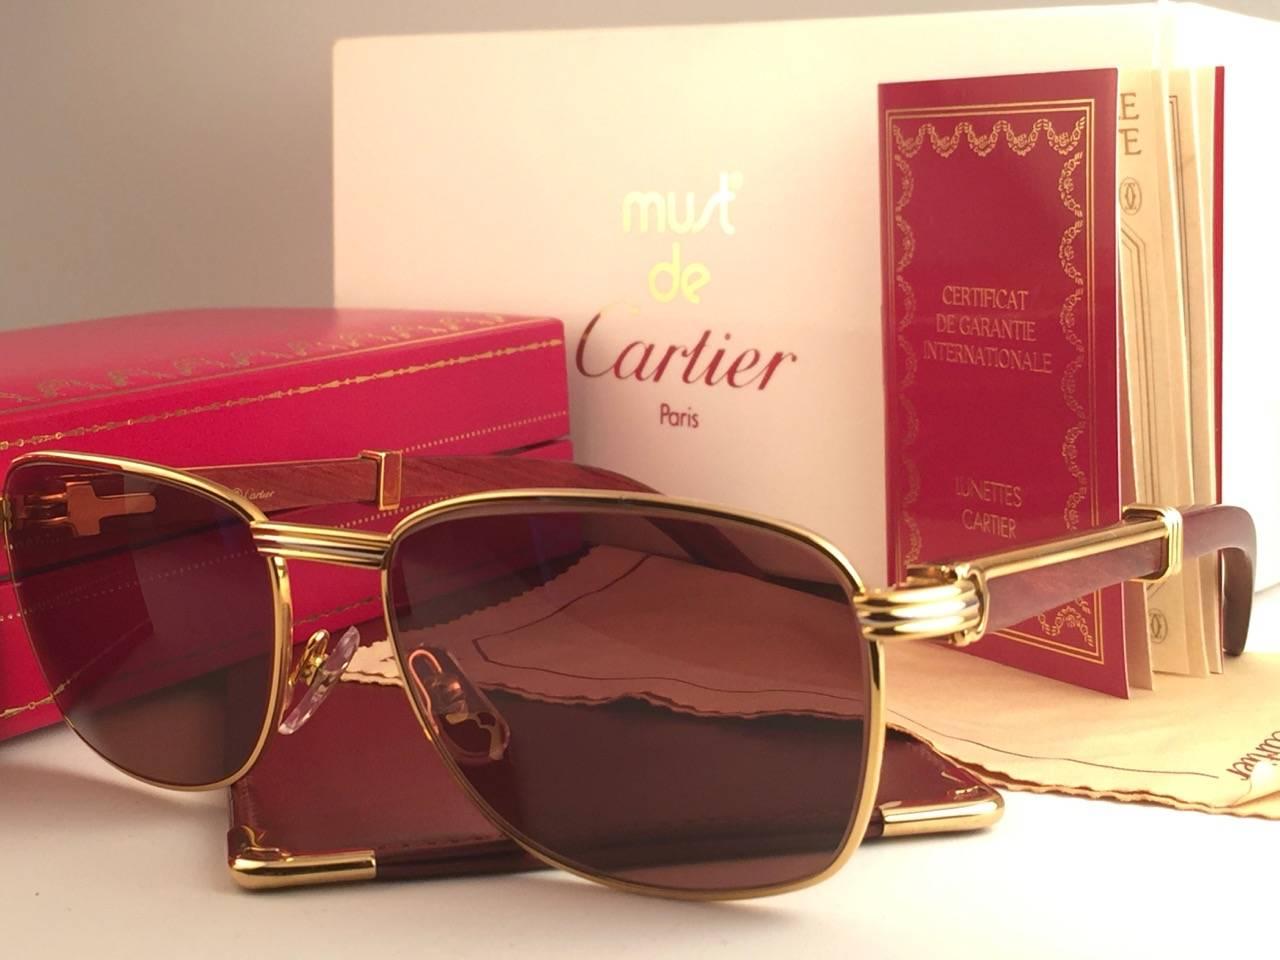 New 1990 Cartier Full Set Amboise Bubinga Hardwood Sunglasses with new solid honey brown (uv protection) lenses. 
Frame is with the front and sides in yellow and white gold and has the famous wood & gold accents temples. 
Amazing craftsmanship! All